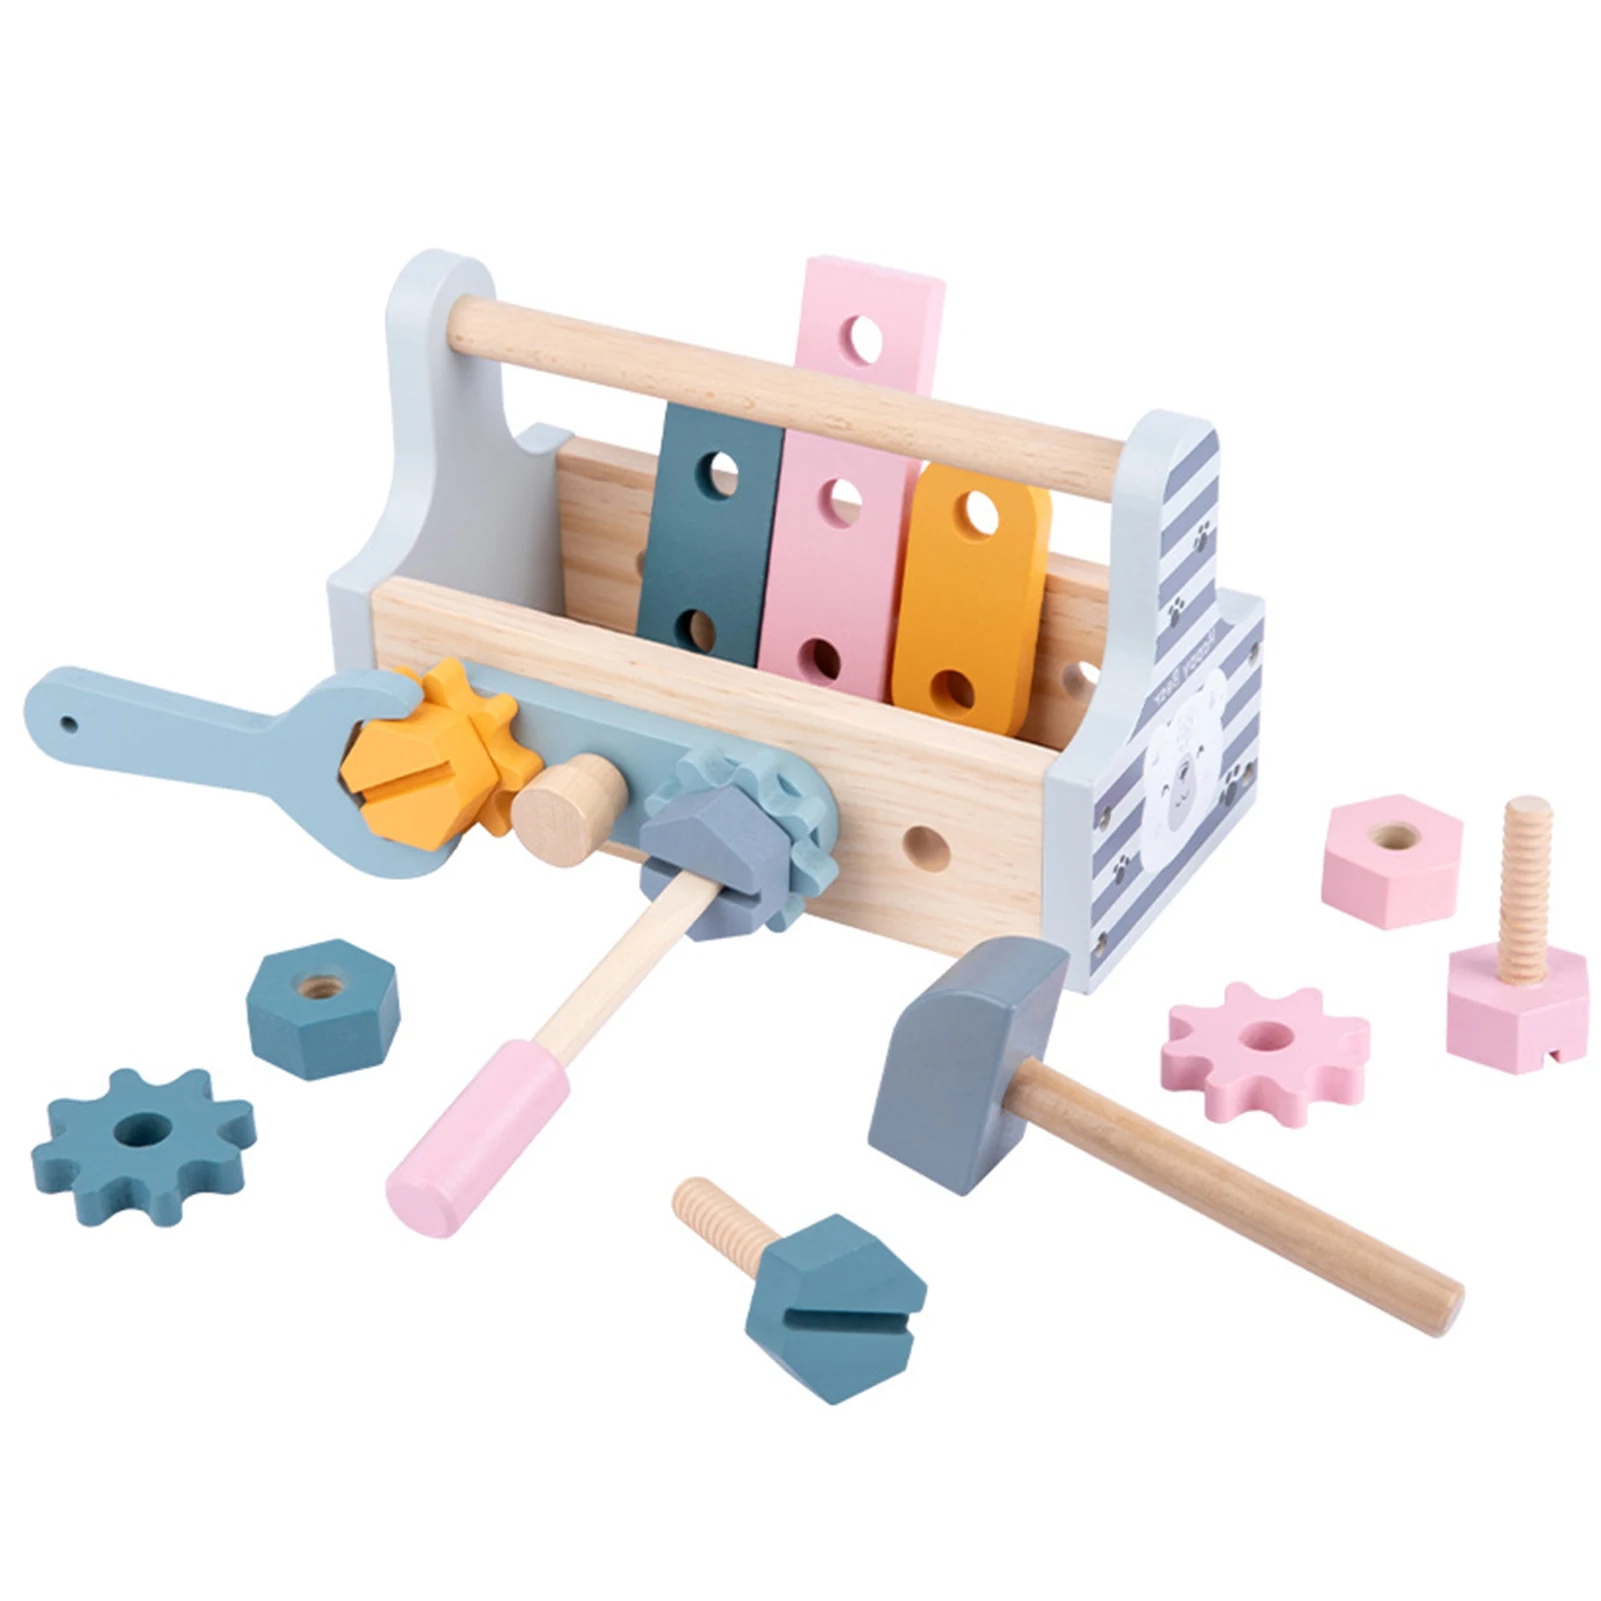 

Kids Toddlers Wooden Tool Box Set Pretend Play Repair Toolbox Toys Montessori Toys Develop Exercise Hands On Ability Games